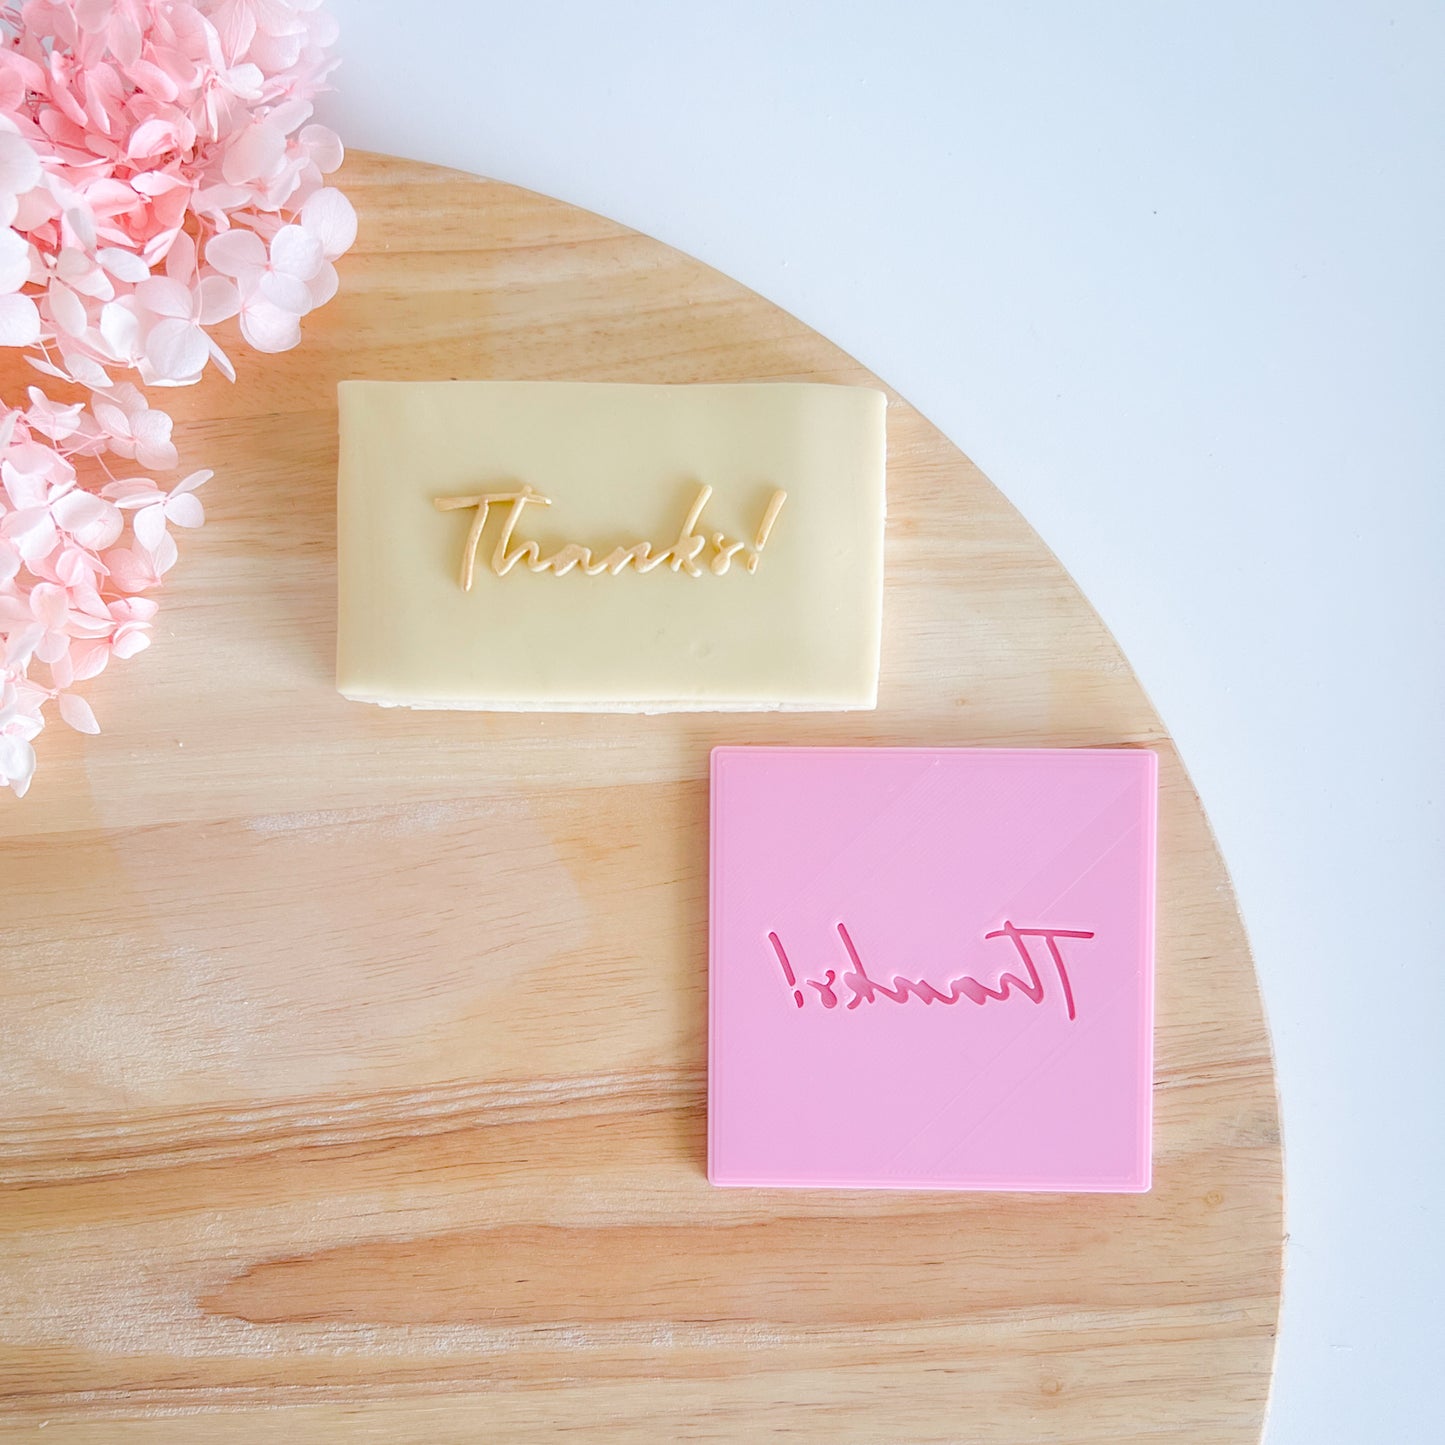 "Thanks" - Embossing Stamp